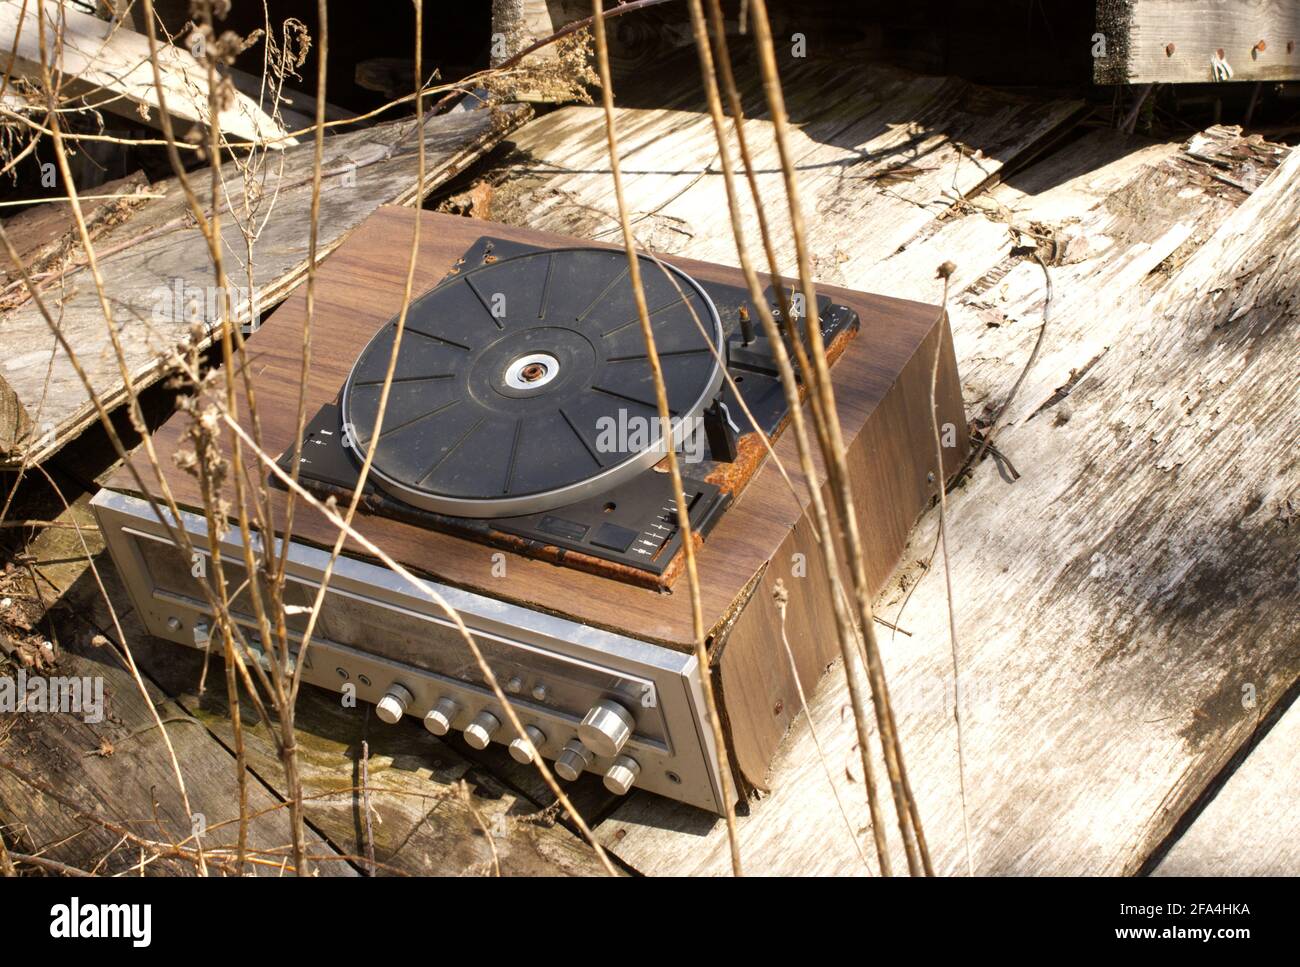 An Abandoned Record Player in the Outdoors Stock Photo